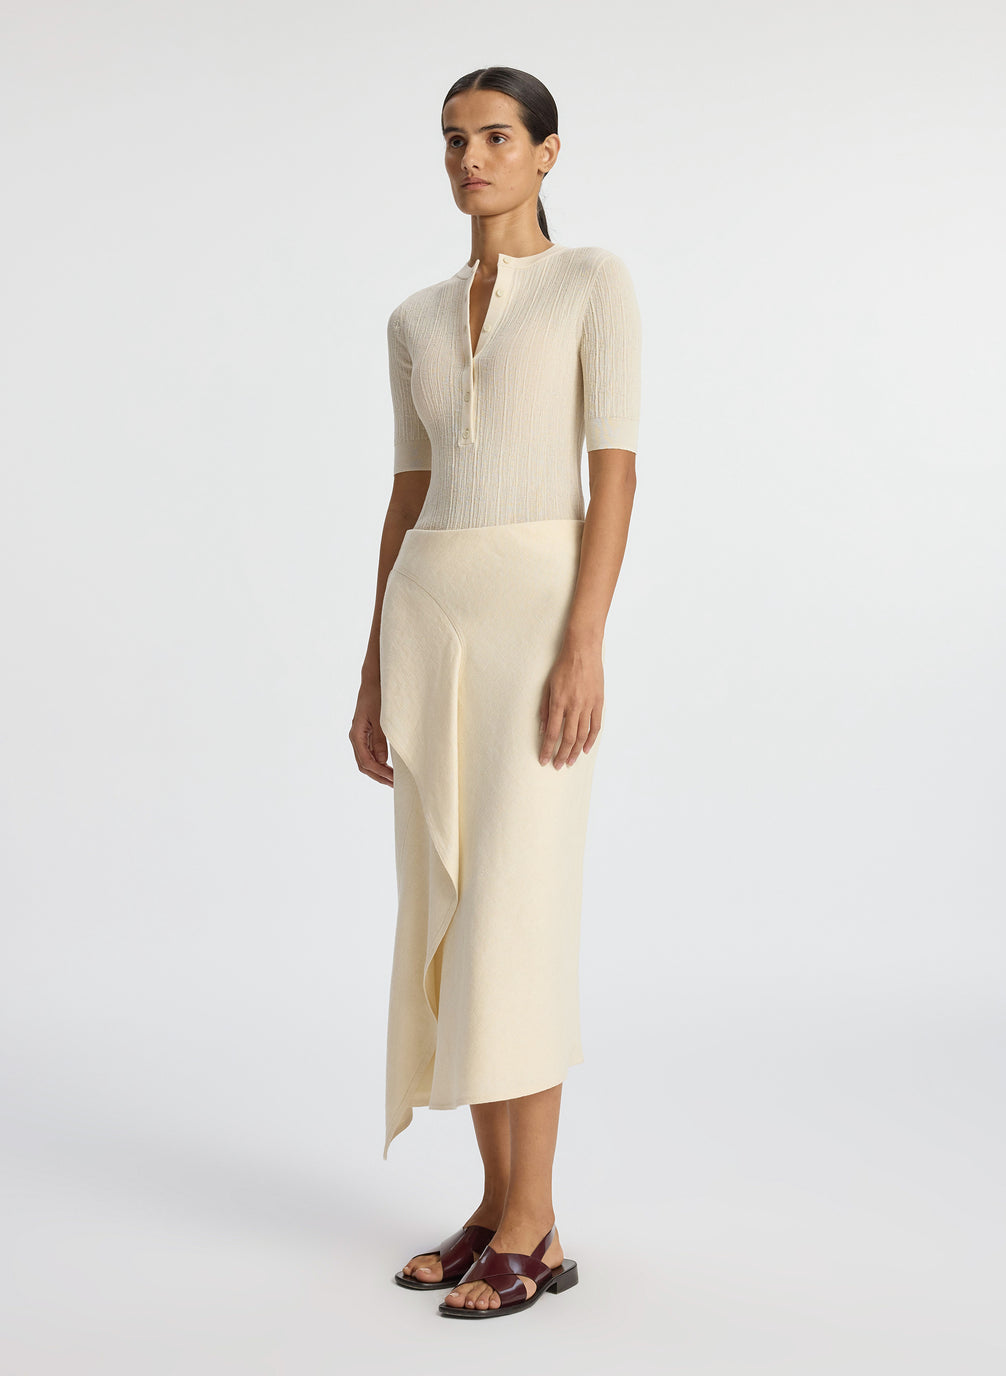 side view of woman wearing beige short sleeve shirt and cream midi skirt